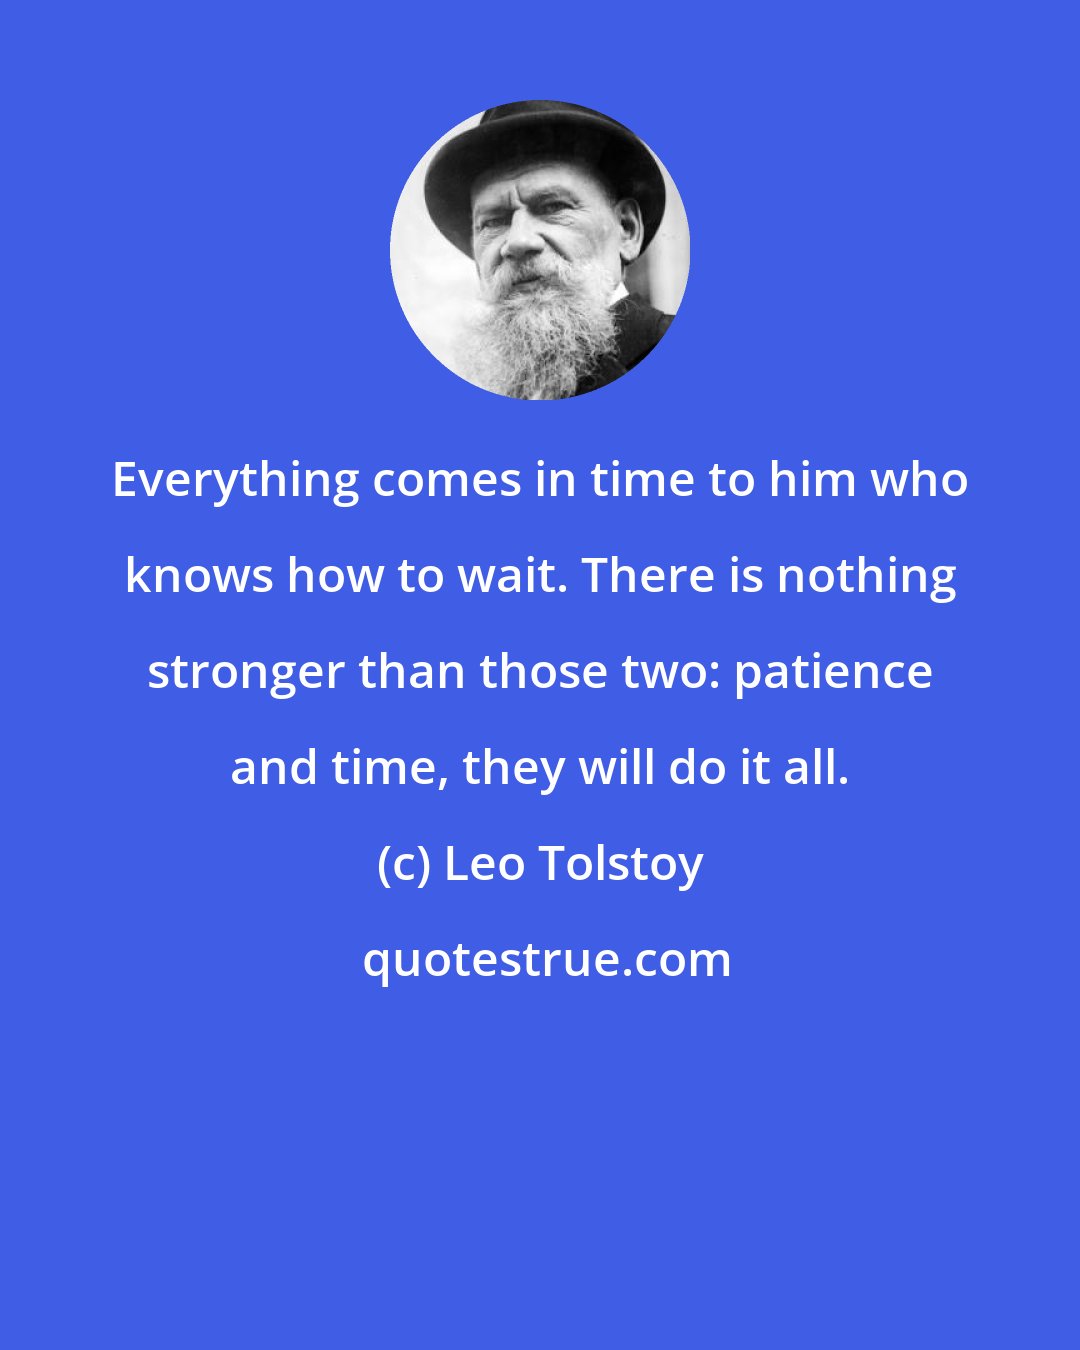 Leo Tolstoy: Everything comes in time to him who knows how to wait. There is nothing stronger than those two: patience and time, they will do it all.